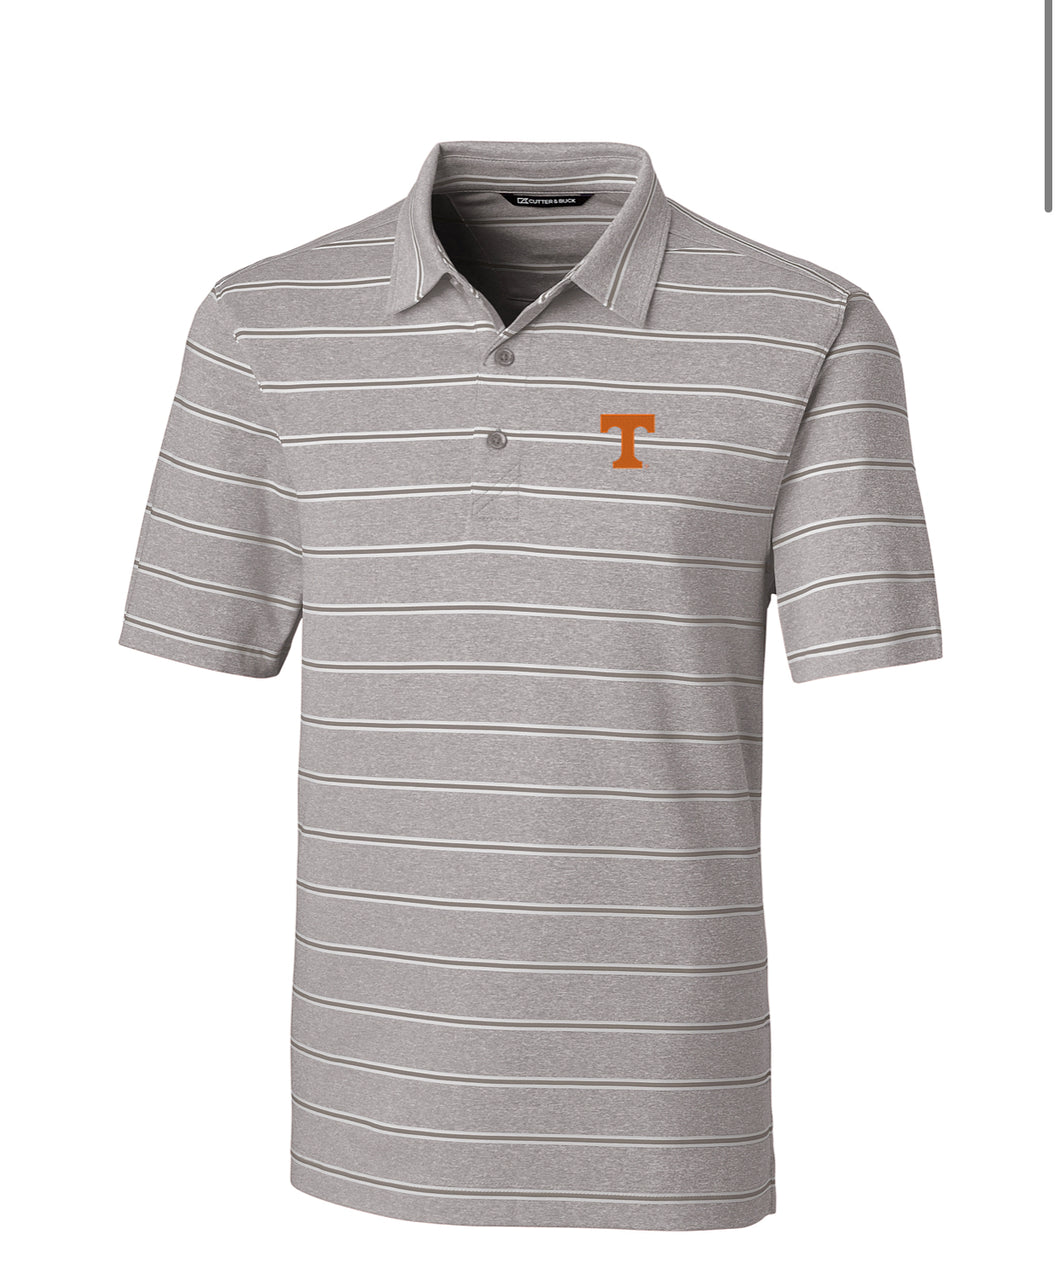 Cutter & Buck Tennessee Forge Heathered Stripe Stretch Mens Polo